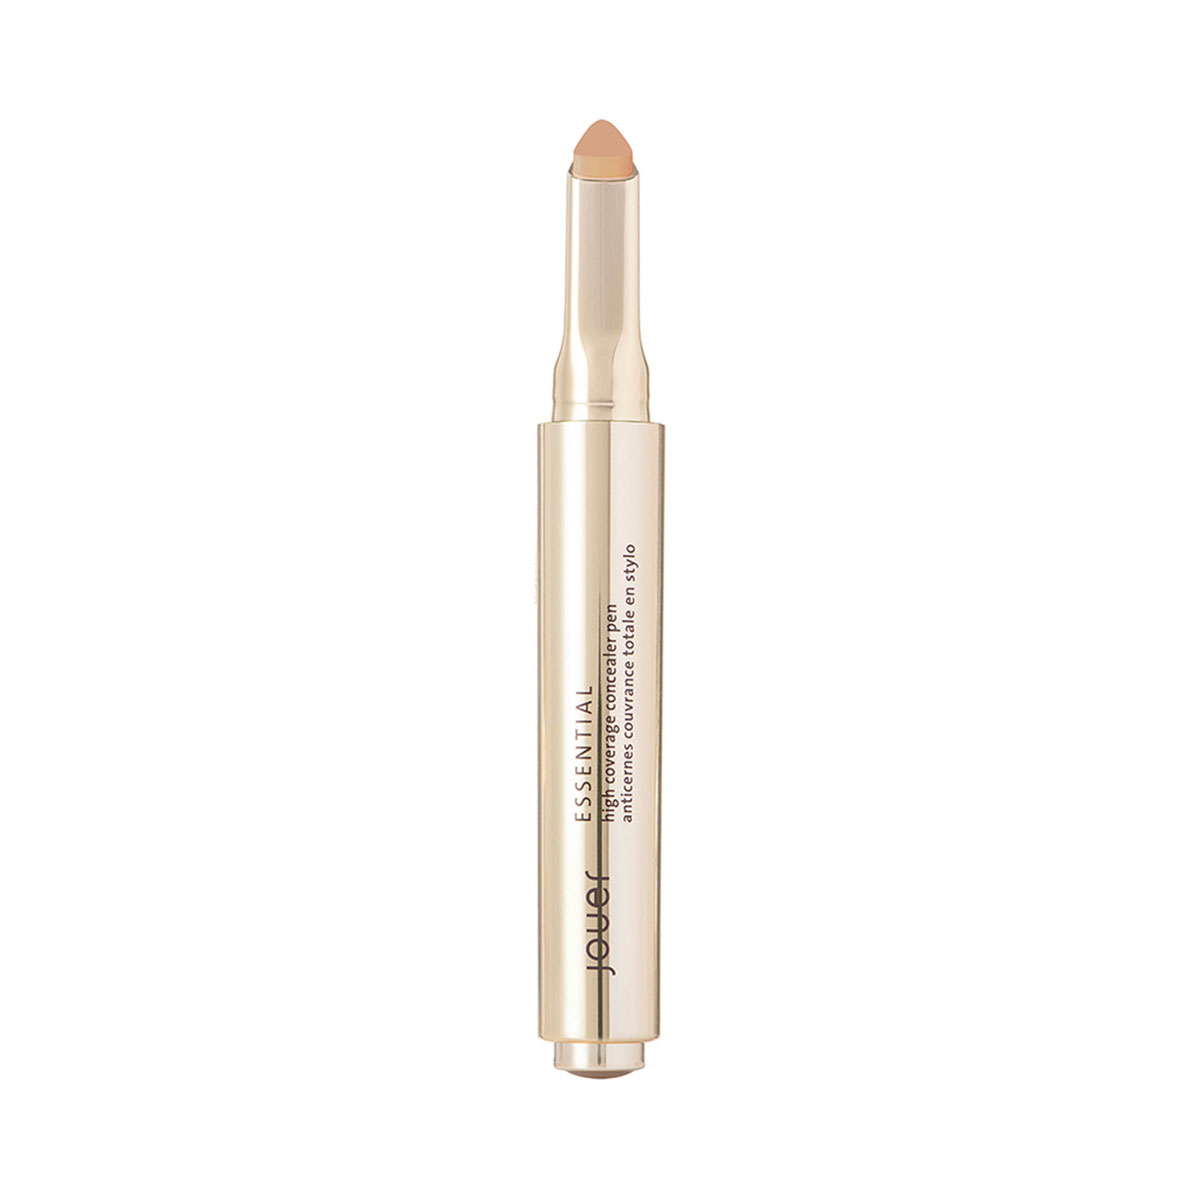 Jouer Cosmetics Essential High Coverage Concealer Pen 23G Toast